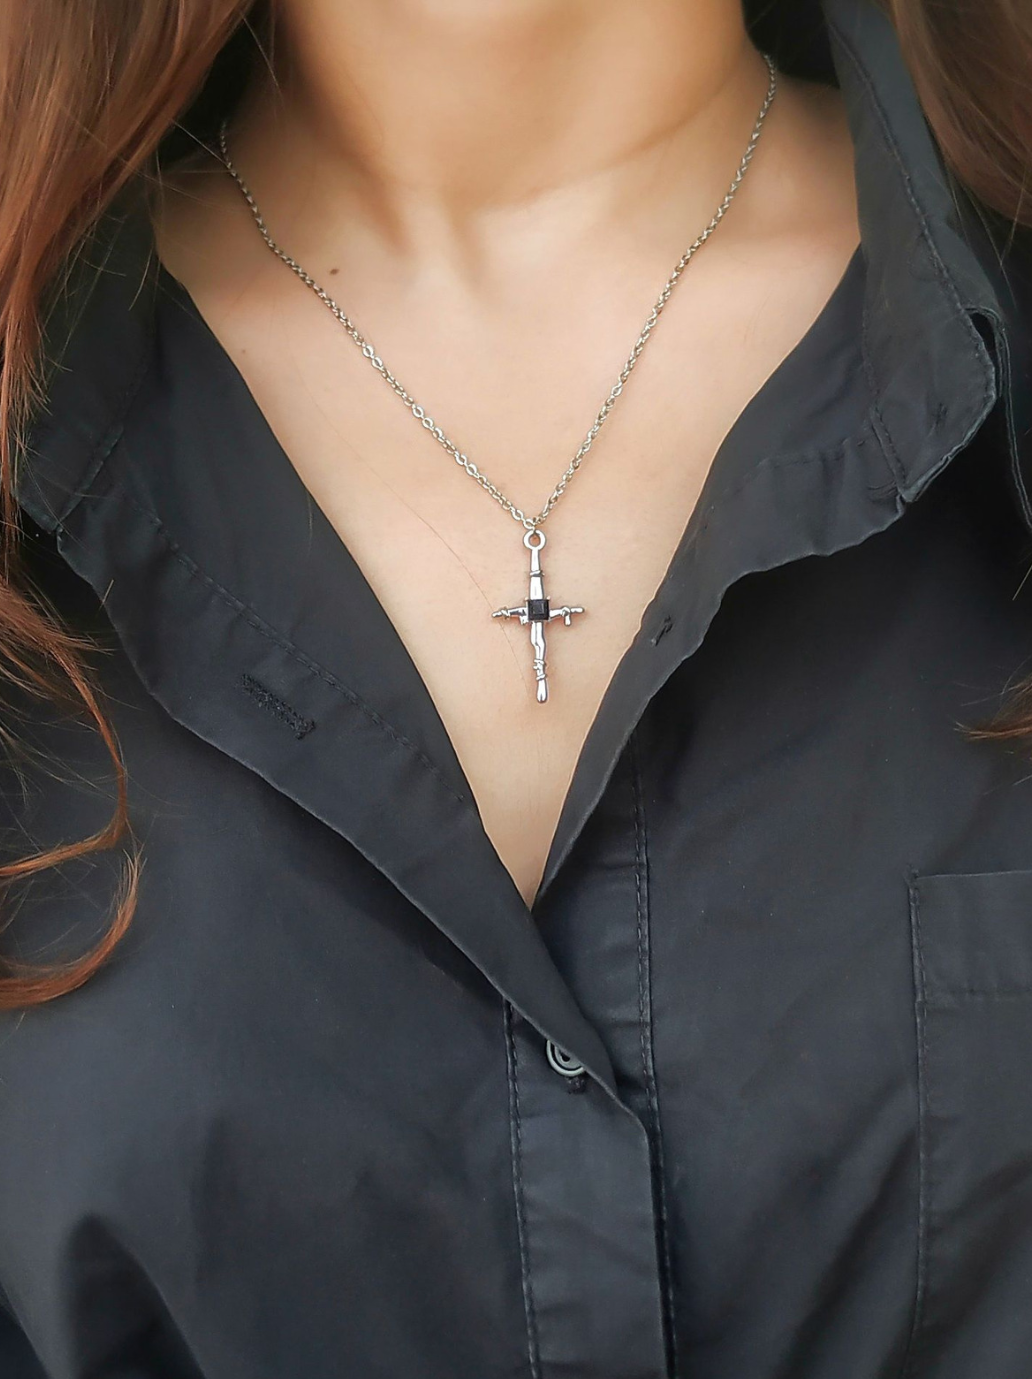 Black Stone Cross with Chain Necklace (Female)